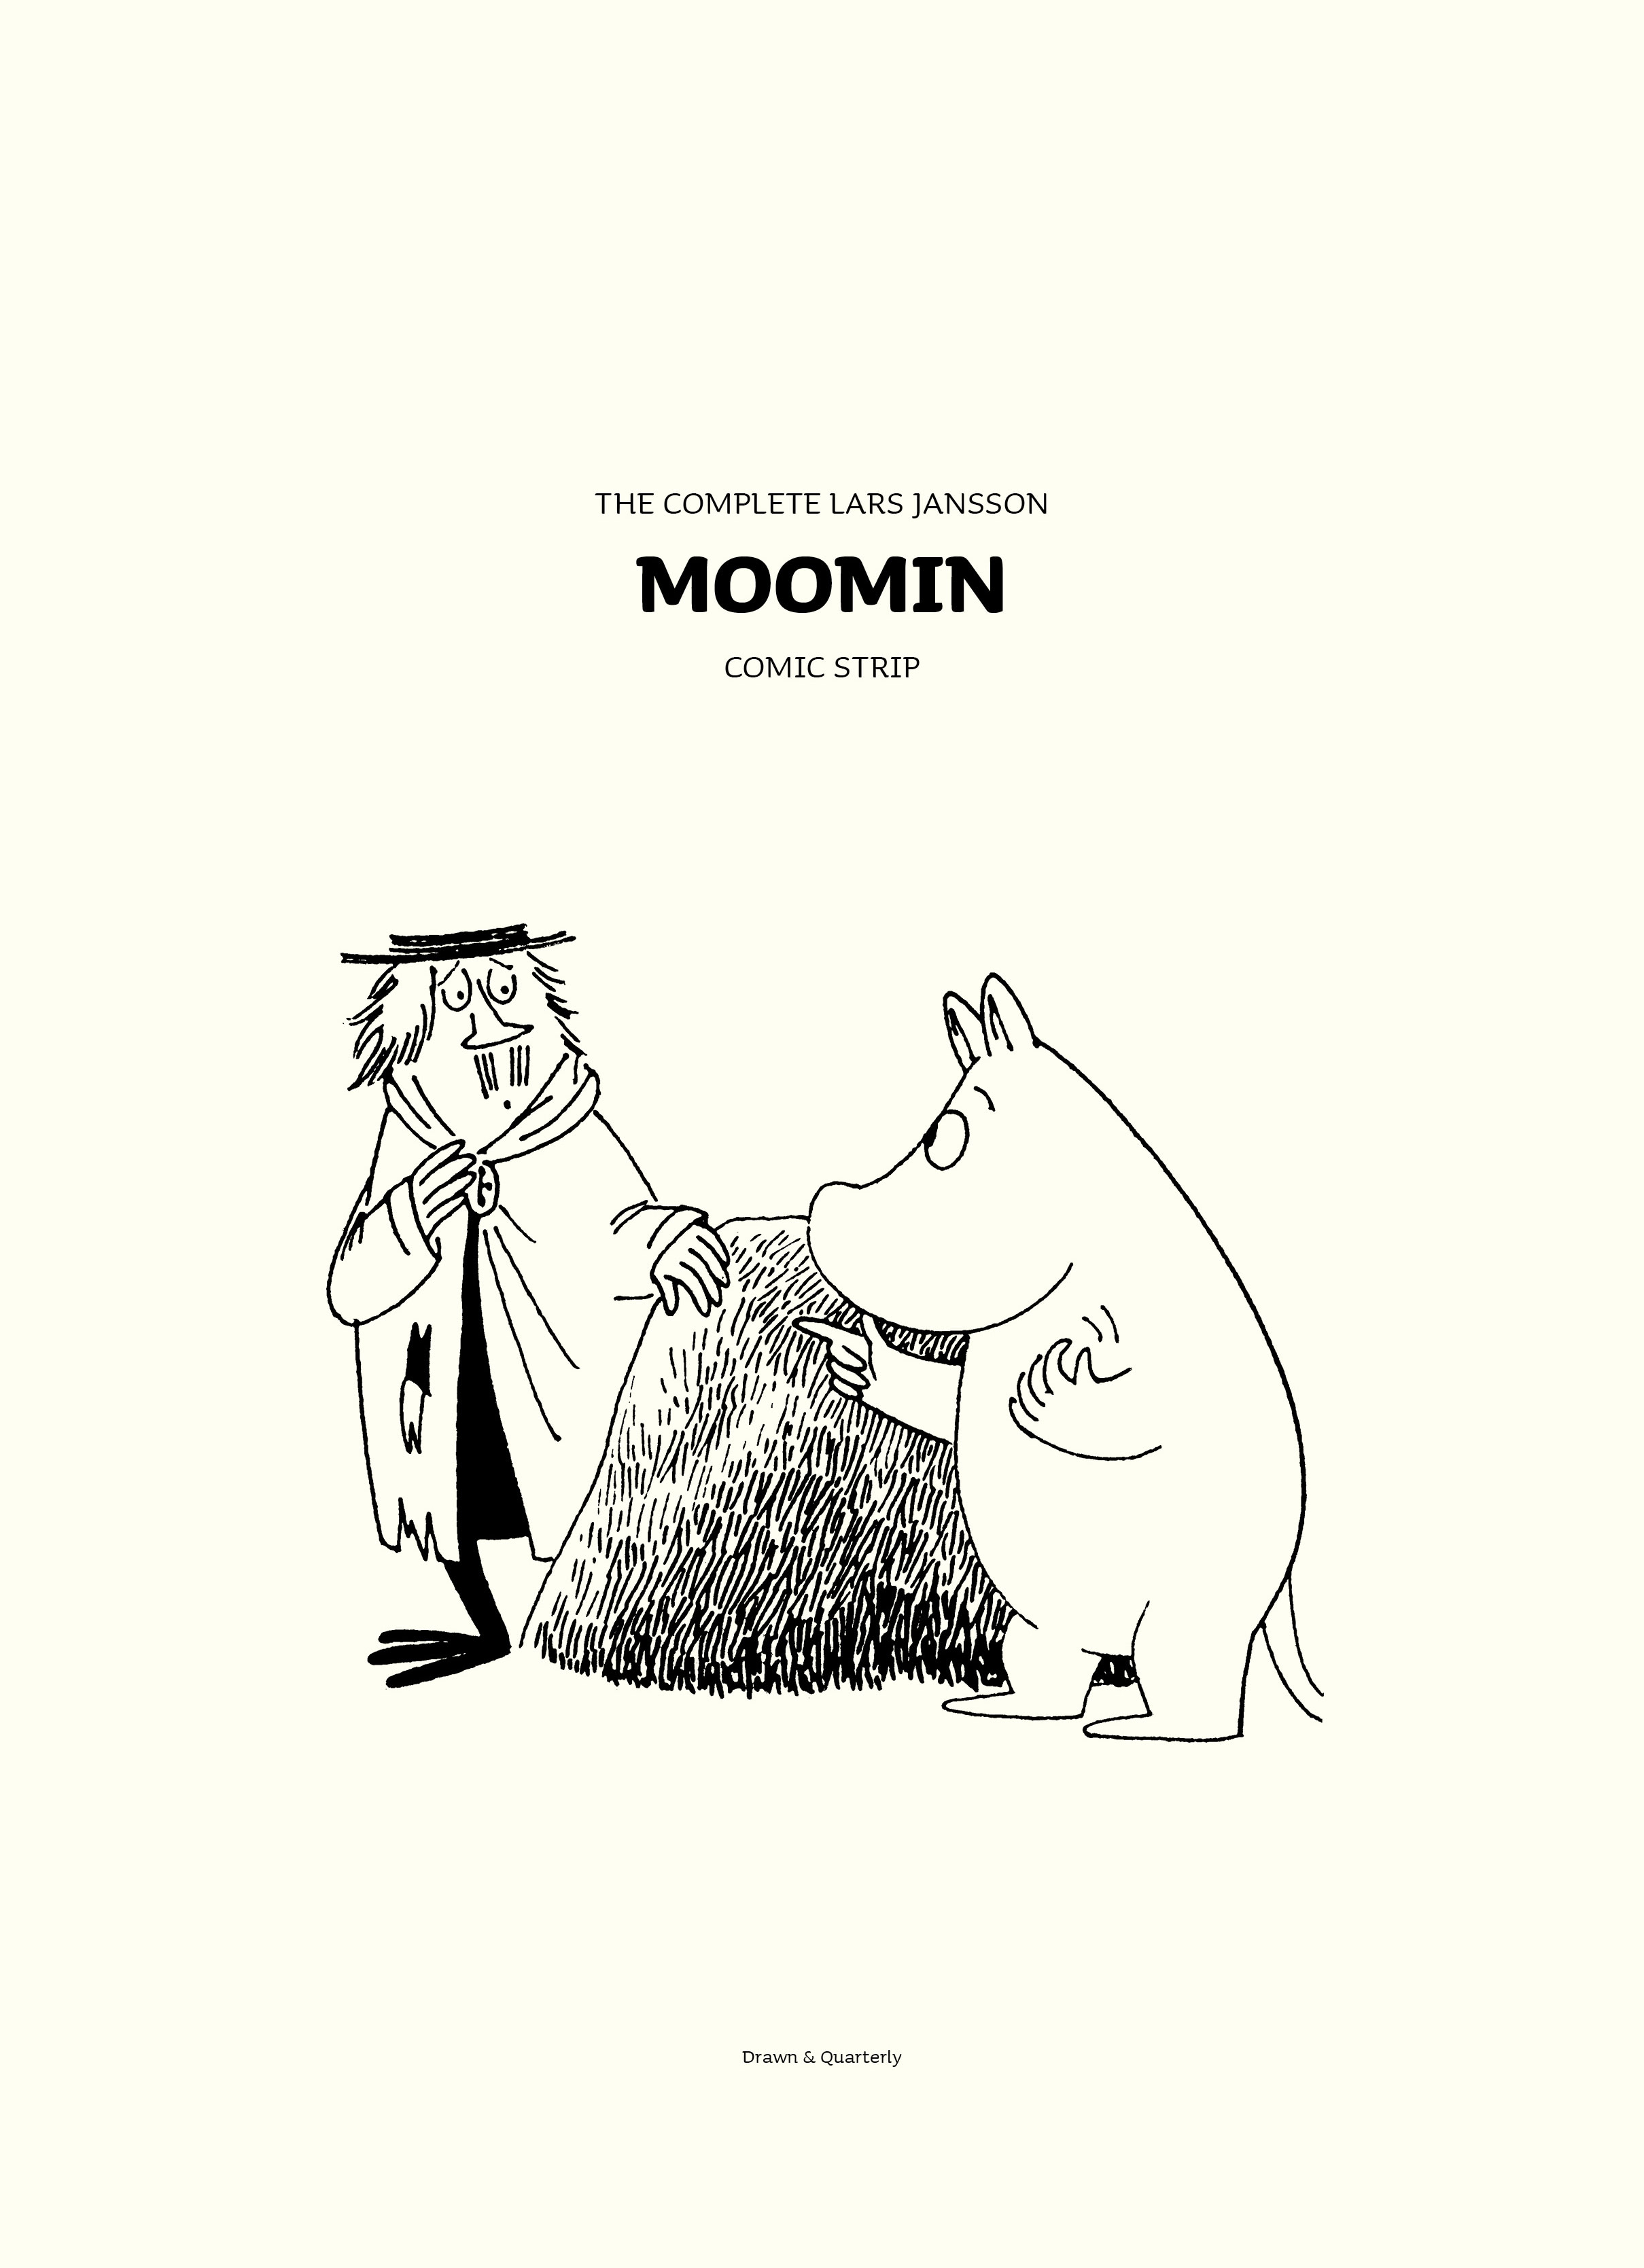 Read online Moomin: The Complete Lars Jansson Comic Strip comic -  Issue # TPB 8 - 2